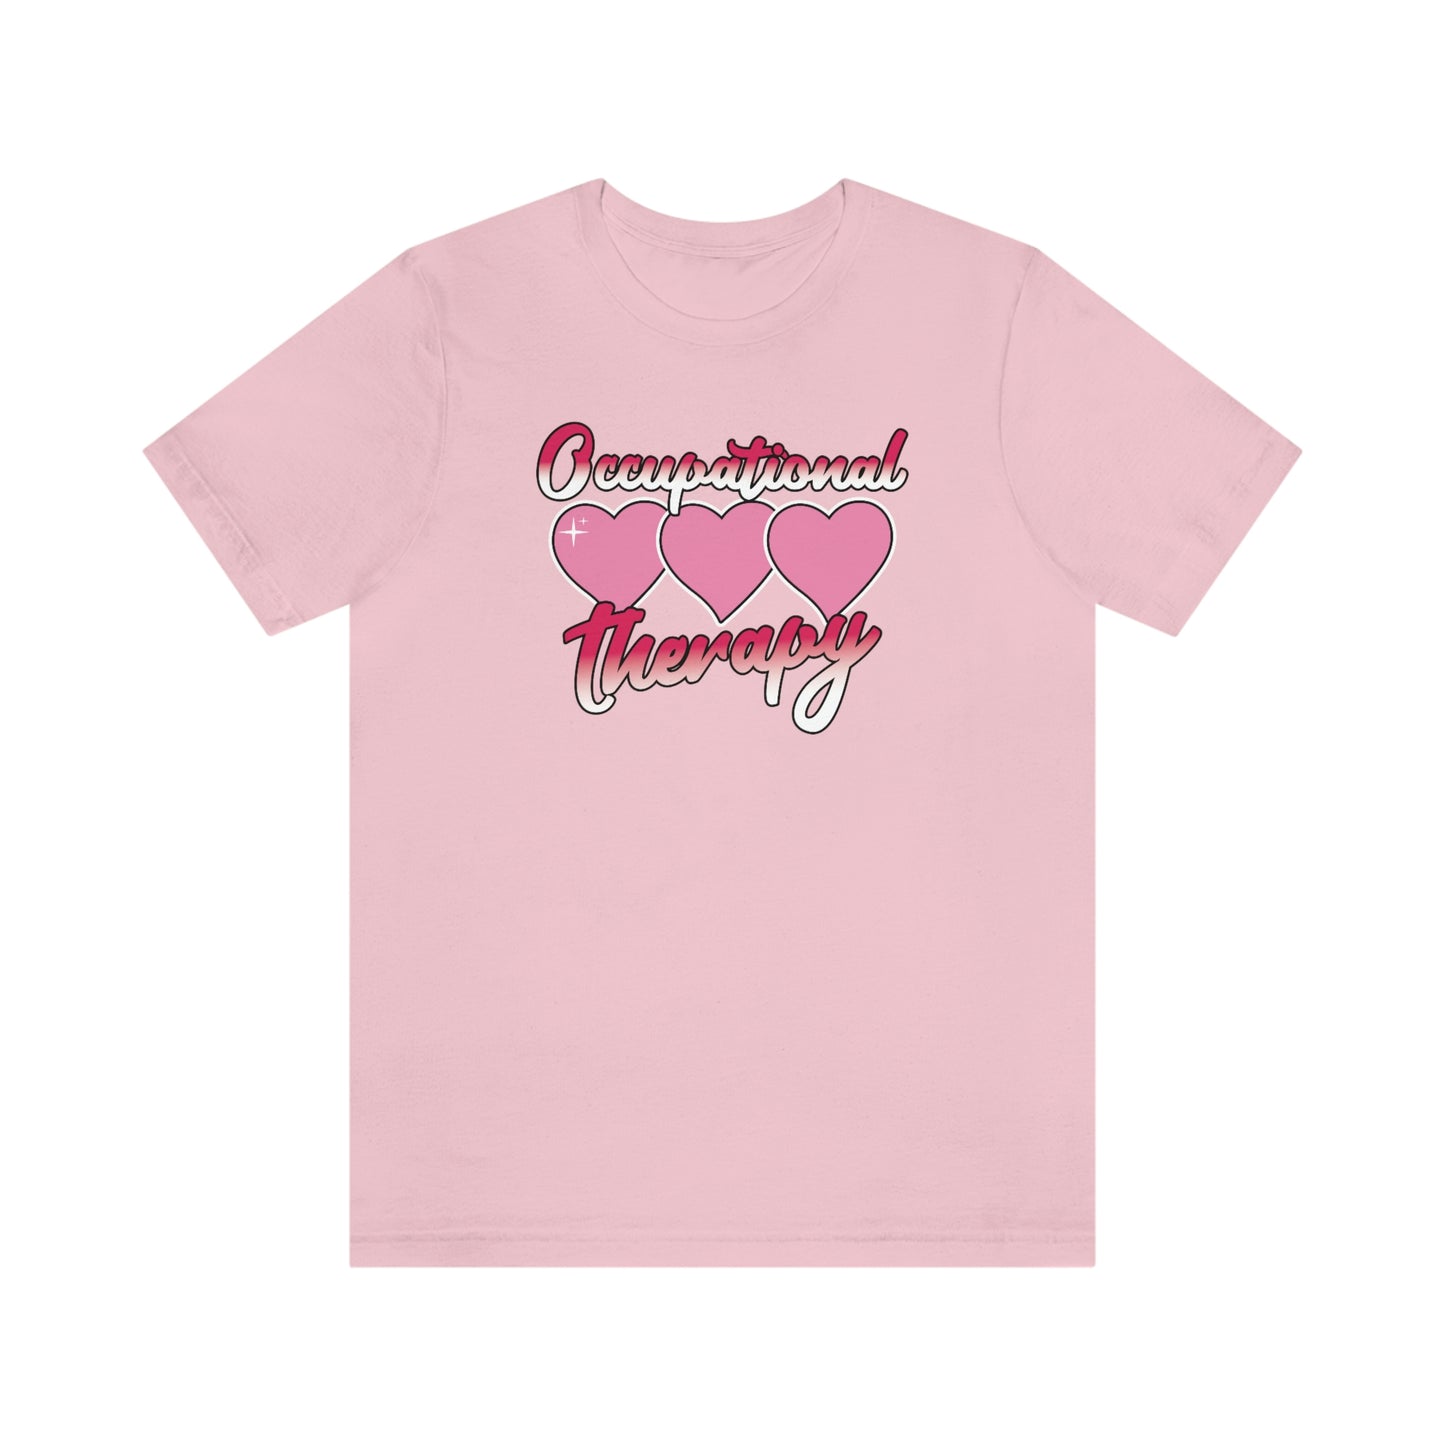 Occupational Therapy Hearts Valentine's Day Shirt